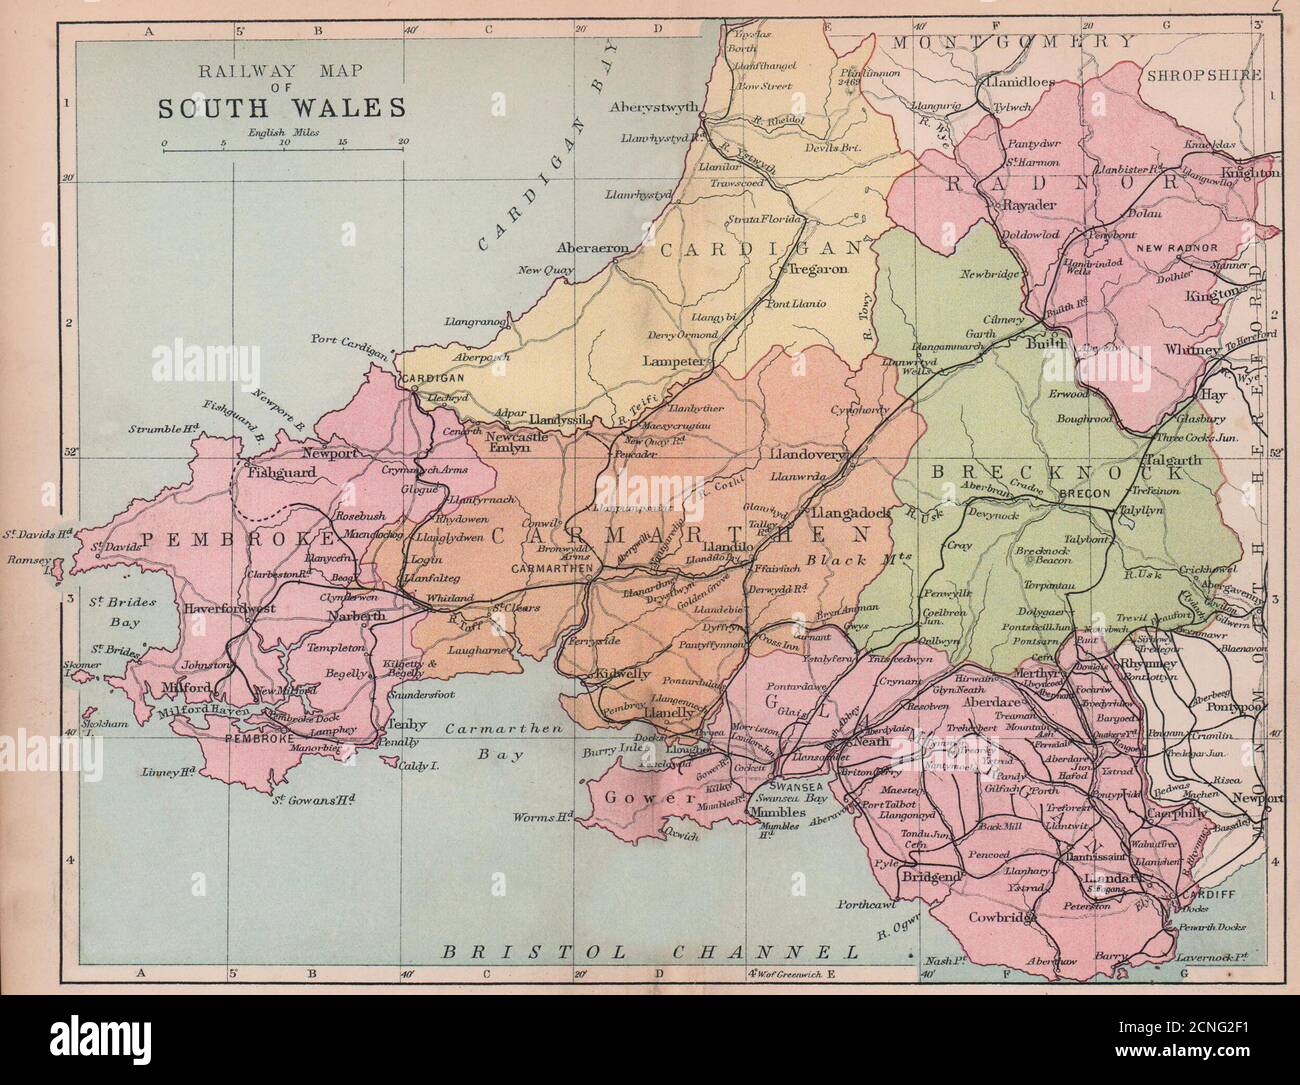 WALES Railway Map of South Wales BARTHOLOMEW 1882 old antique plan chart Stock Photo